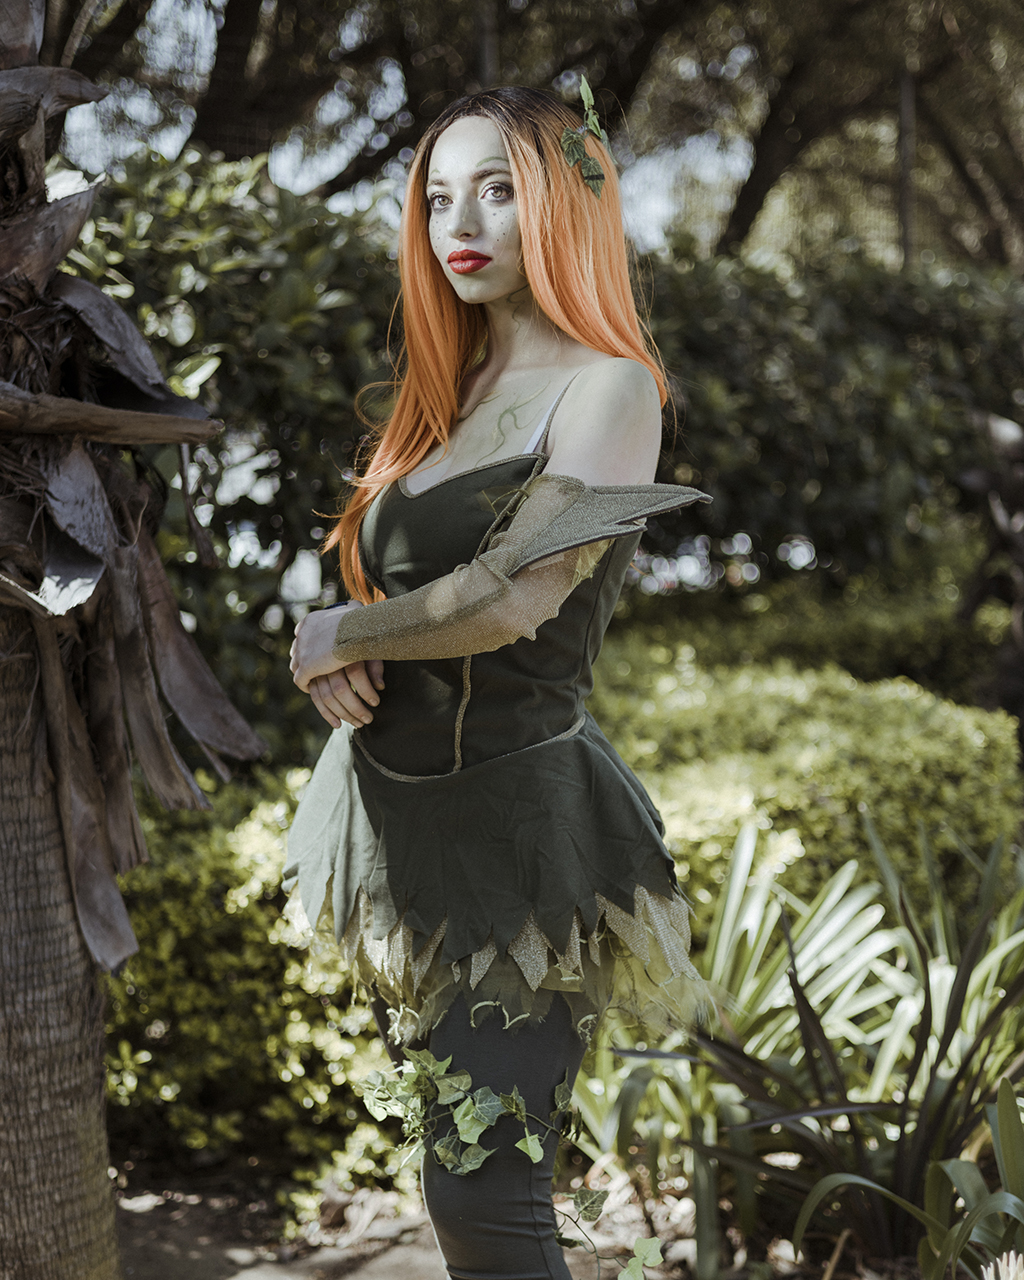 South African cosplayer Gabby Maia, 21, poses for a portrait while dressed as the character Poison Ivy.